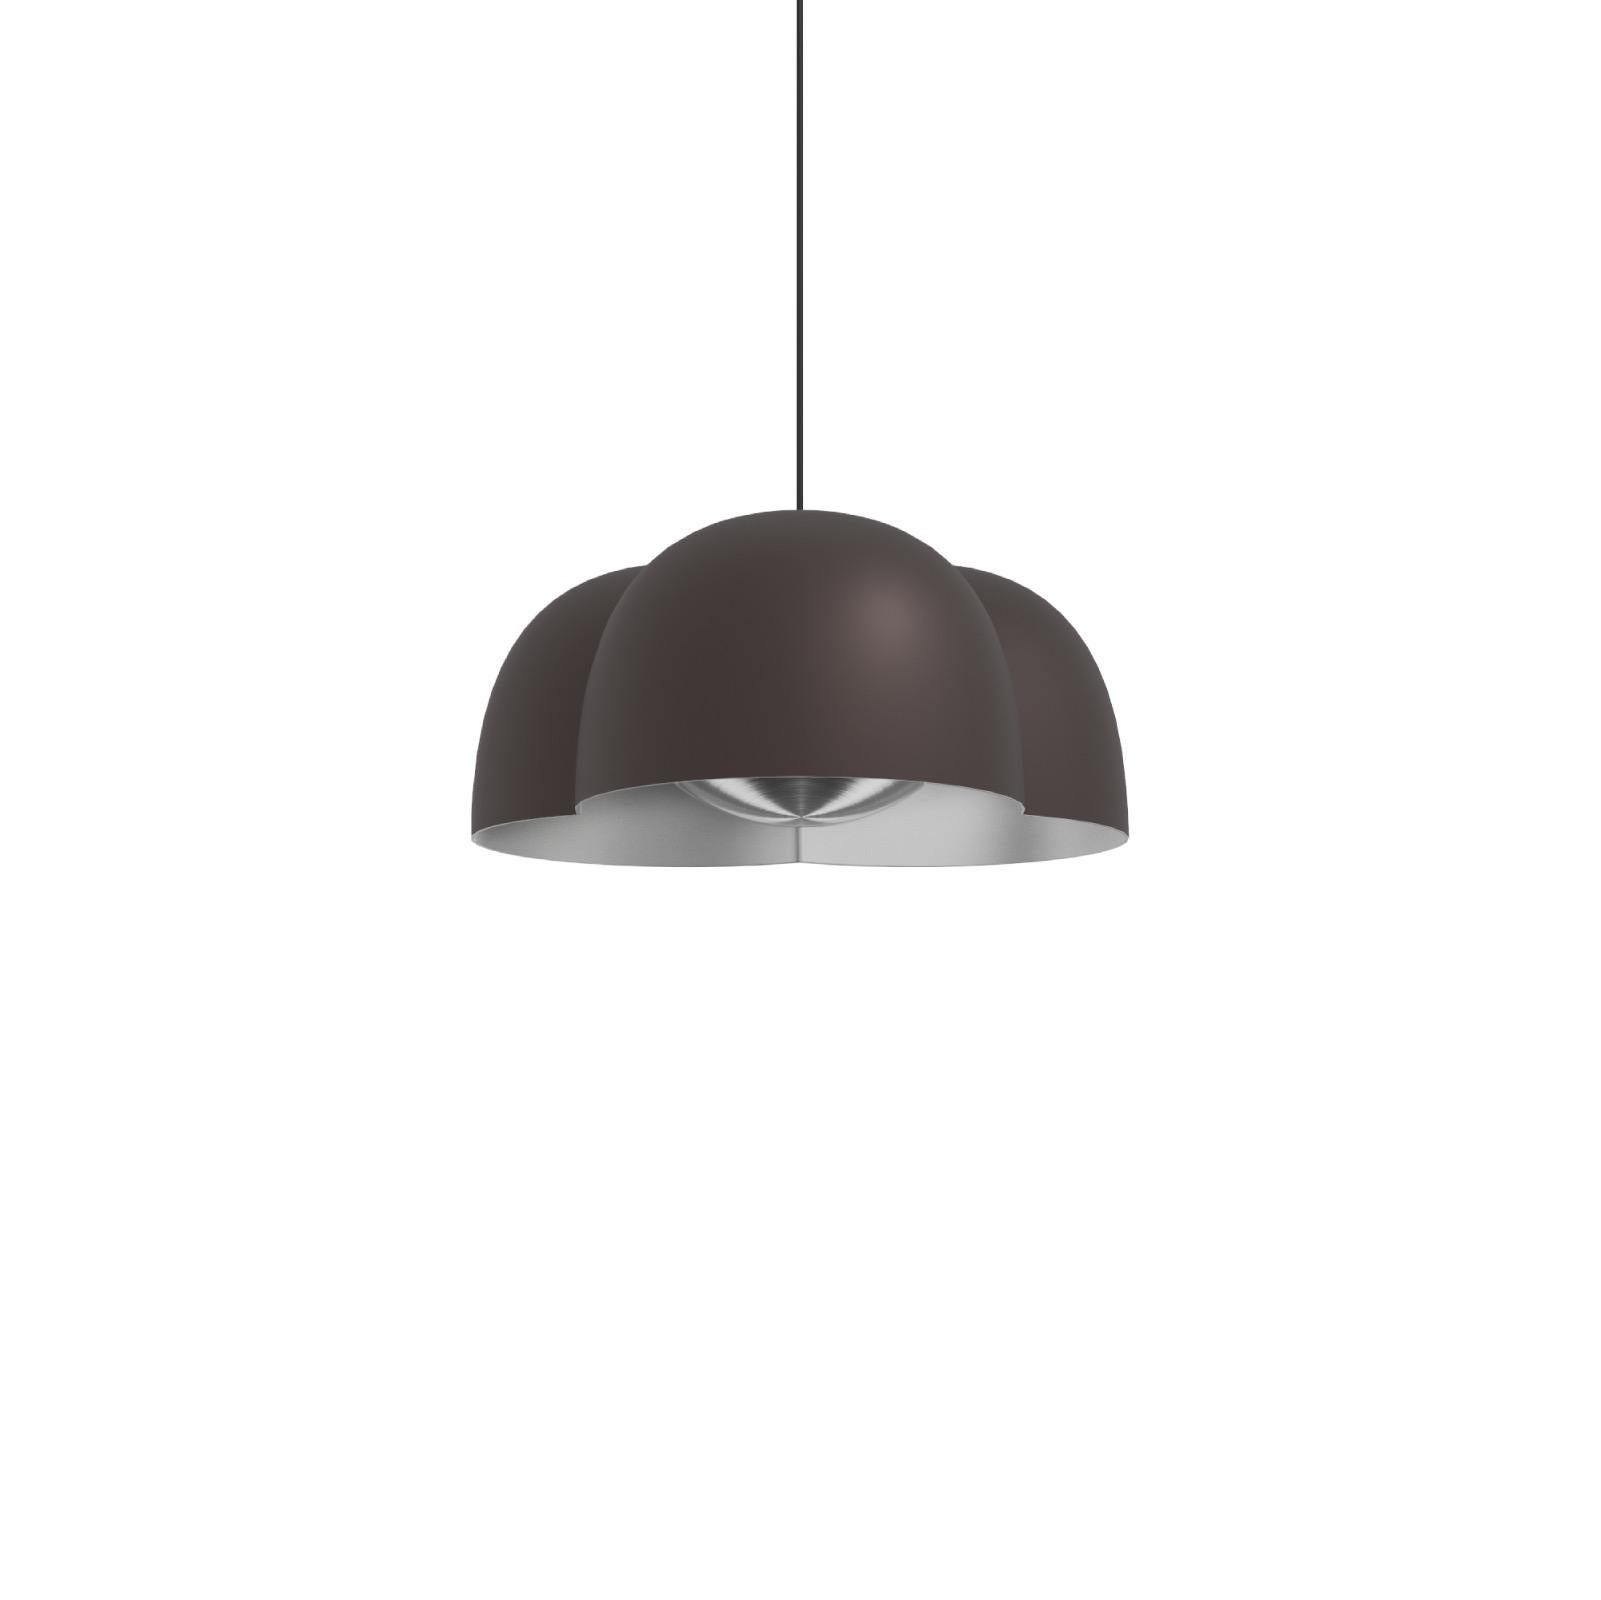 Cotton Pendant lamp by Sebastian Herkner x AGO Lighting
Chocolate

Materials: Aluminum, Stainless 
Light Source: Integrated LED (SMD), DC
Watt. 12W
Color temp. 2700 / 3000K
Cable Length: 3m 

Available colors:
Charcoal, chocolate, deep